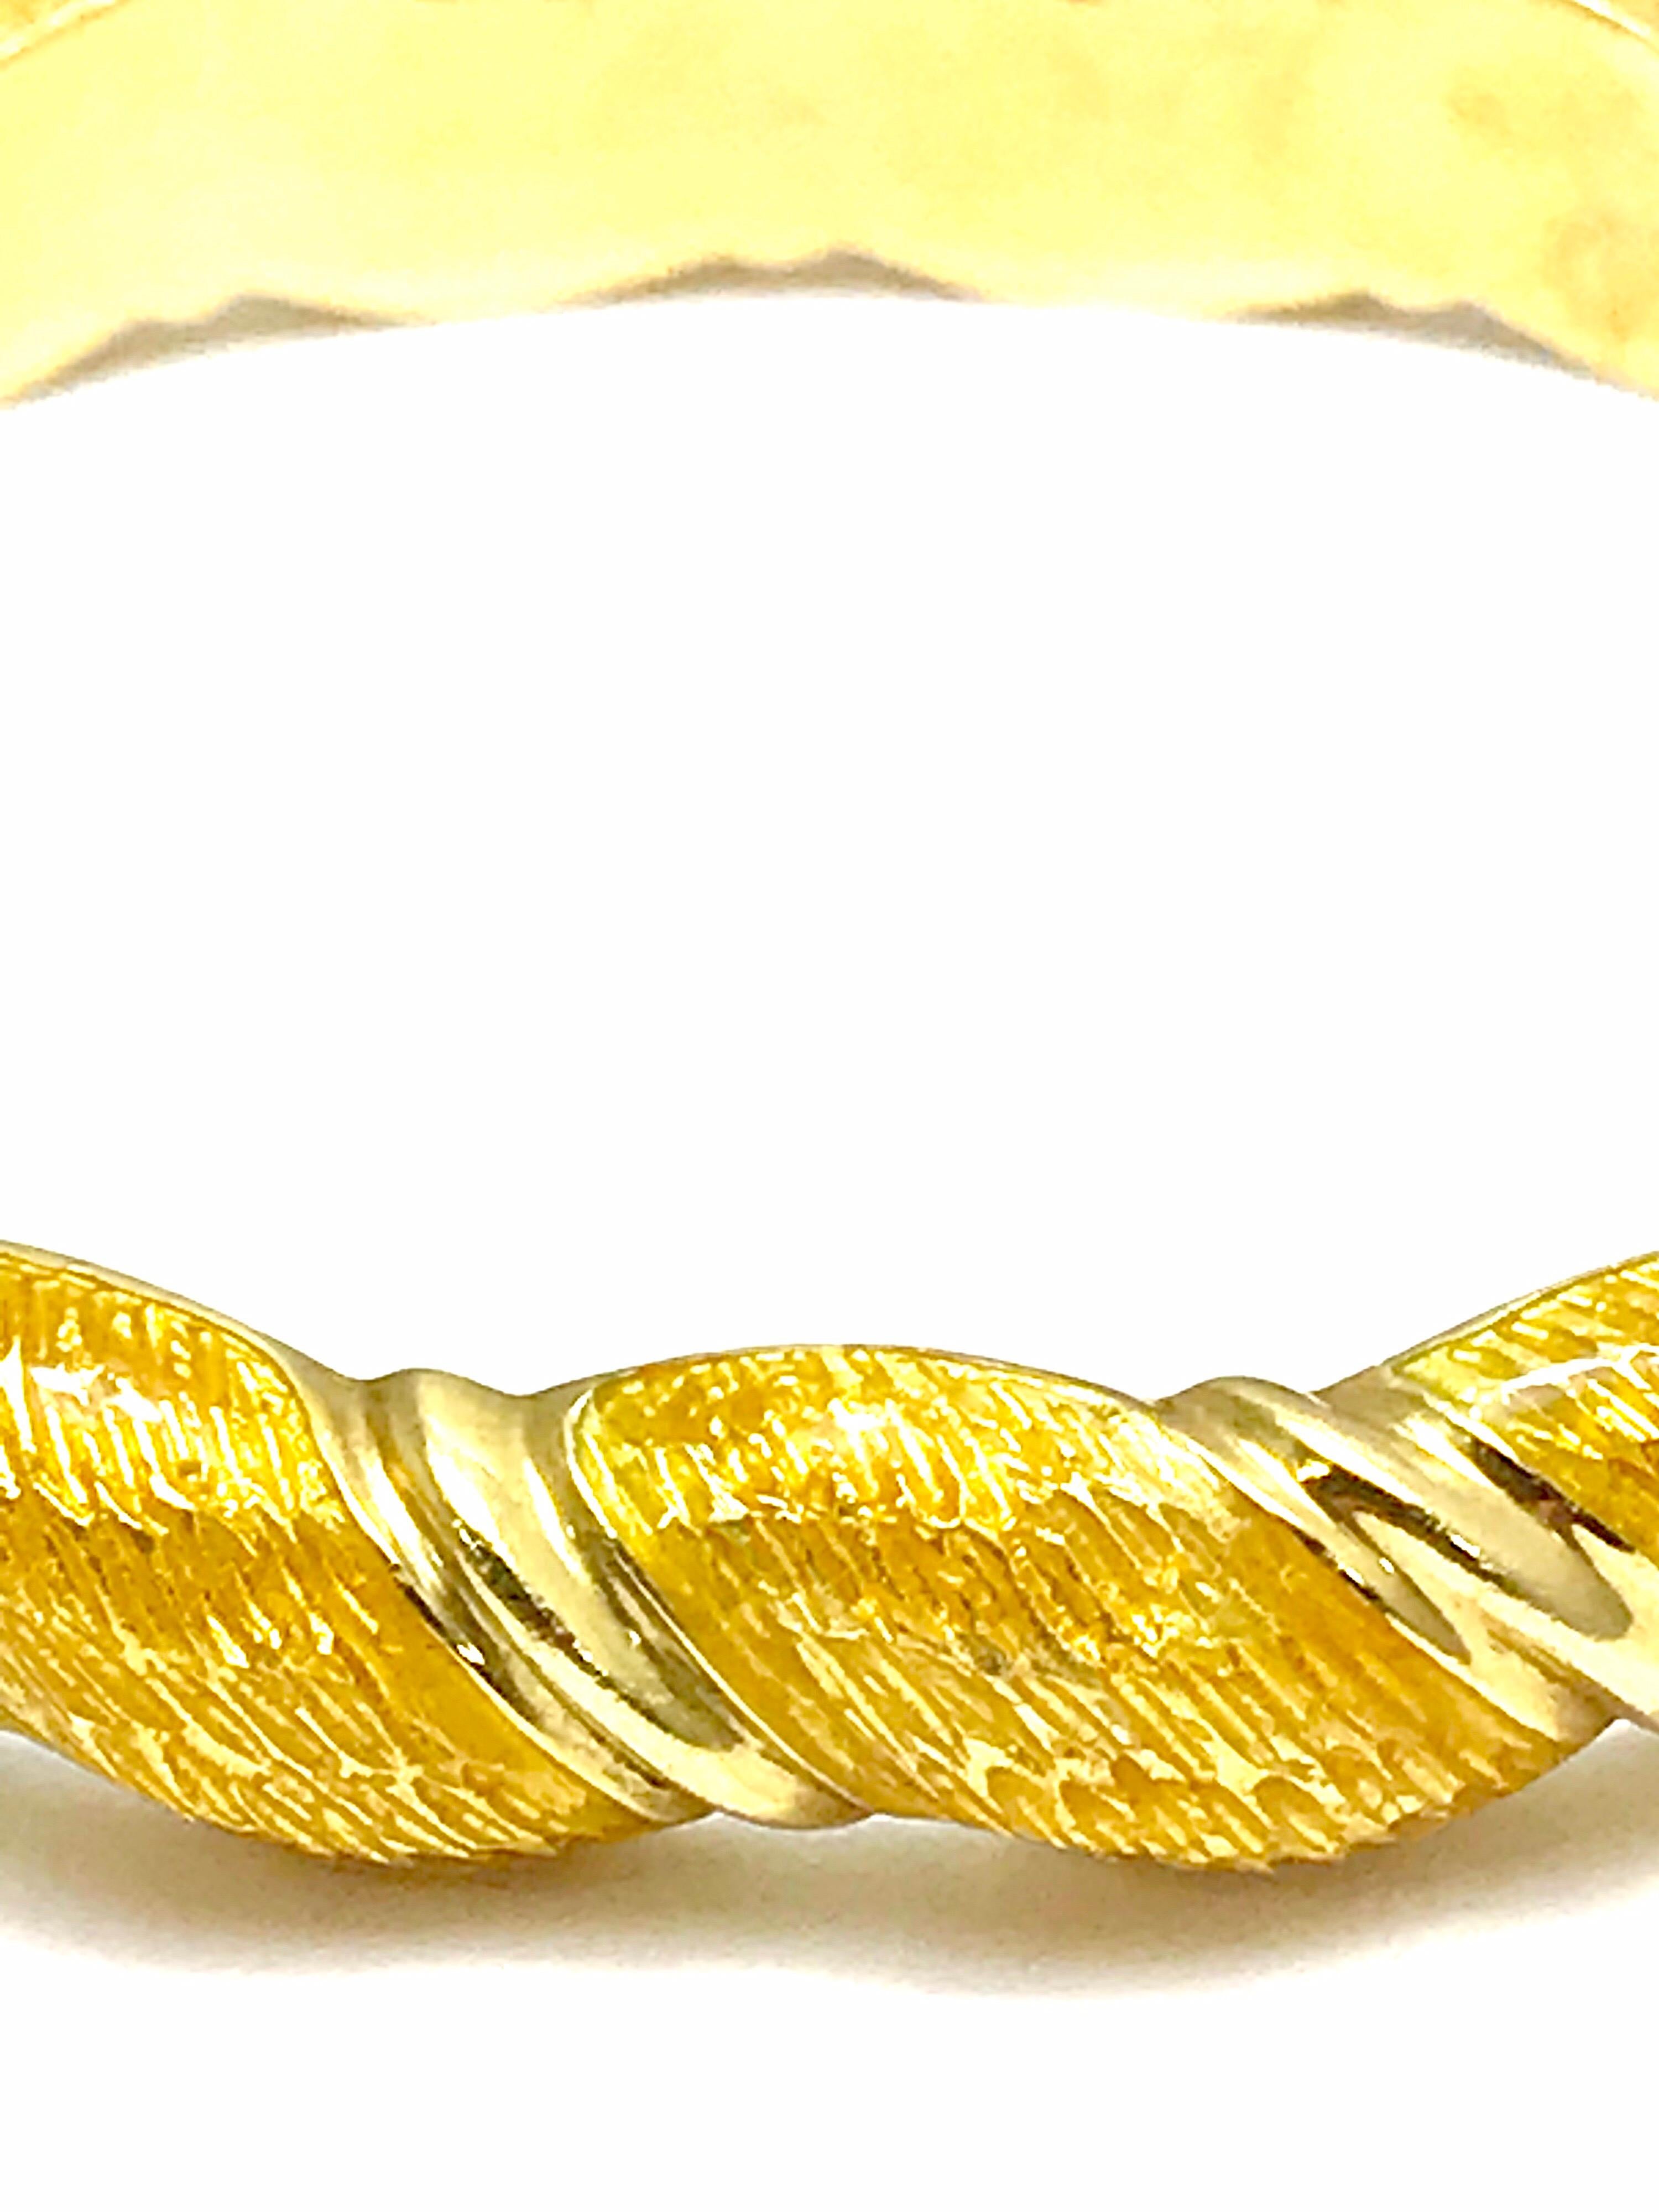 A beautiful honey yellow guilloche enamel and 18 karat yellow gold bangle bracelet.  The enmael has a textured finish with a wave of gold between sections to create the pattern.  The bangle is hinged, and has a push down clasp opening with a safety